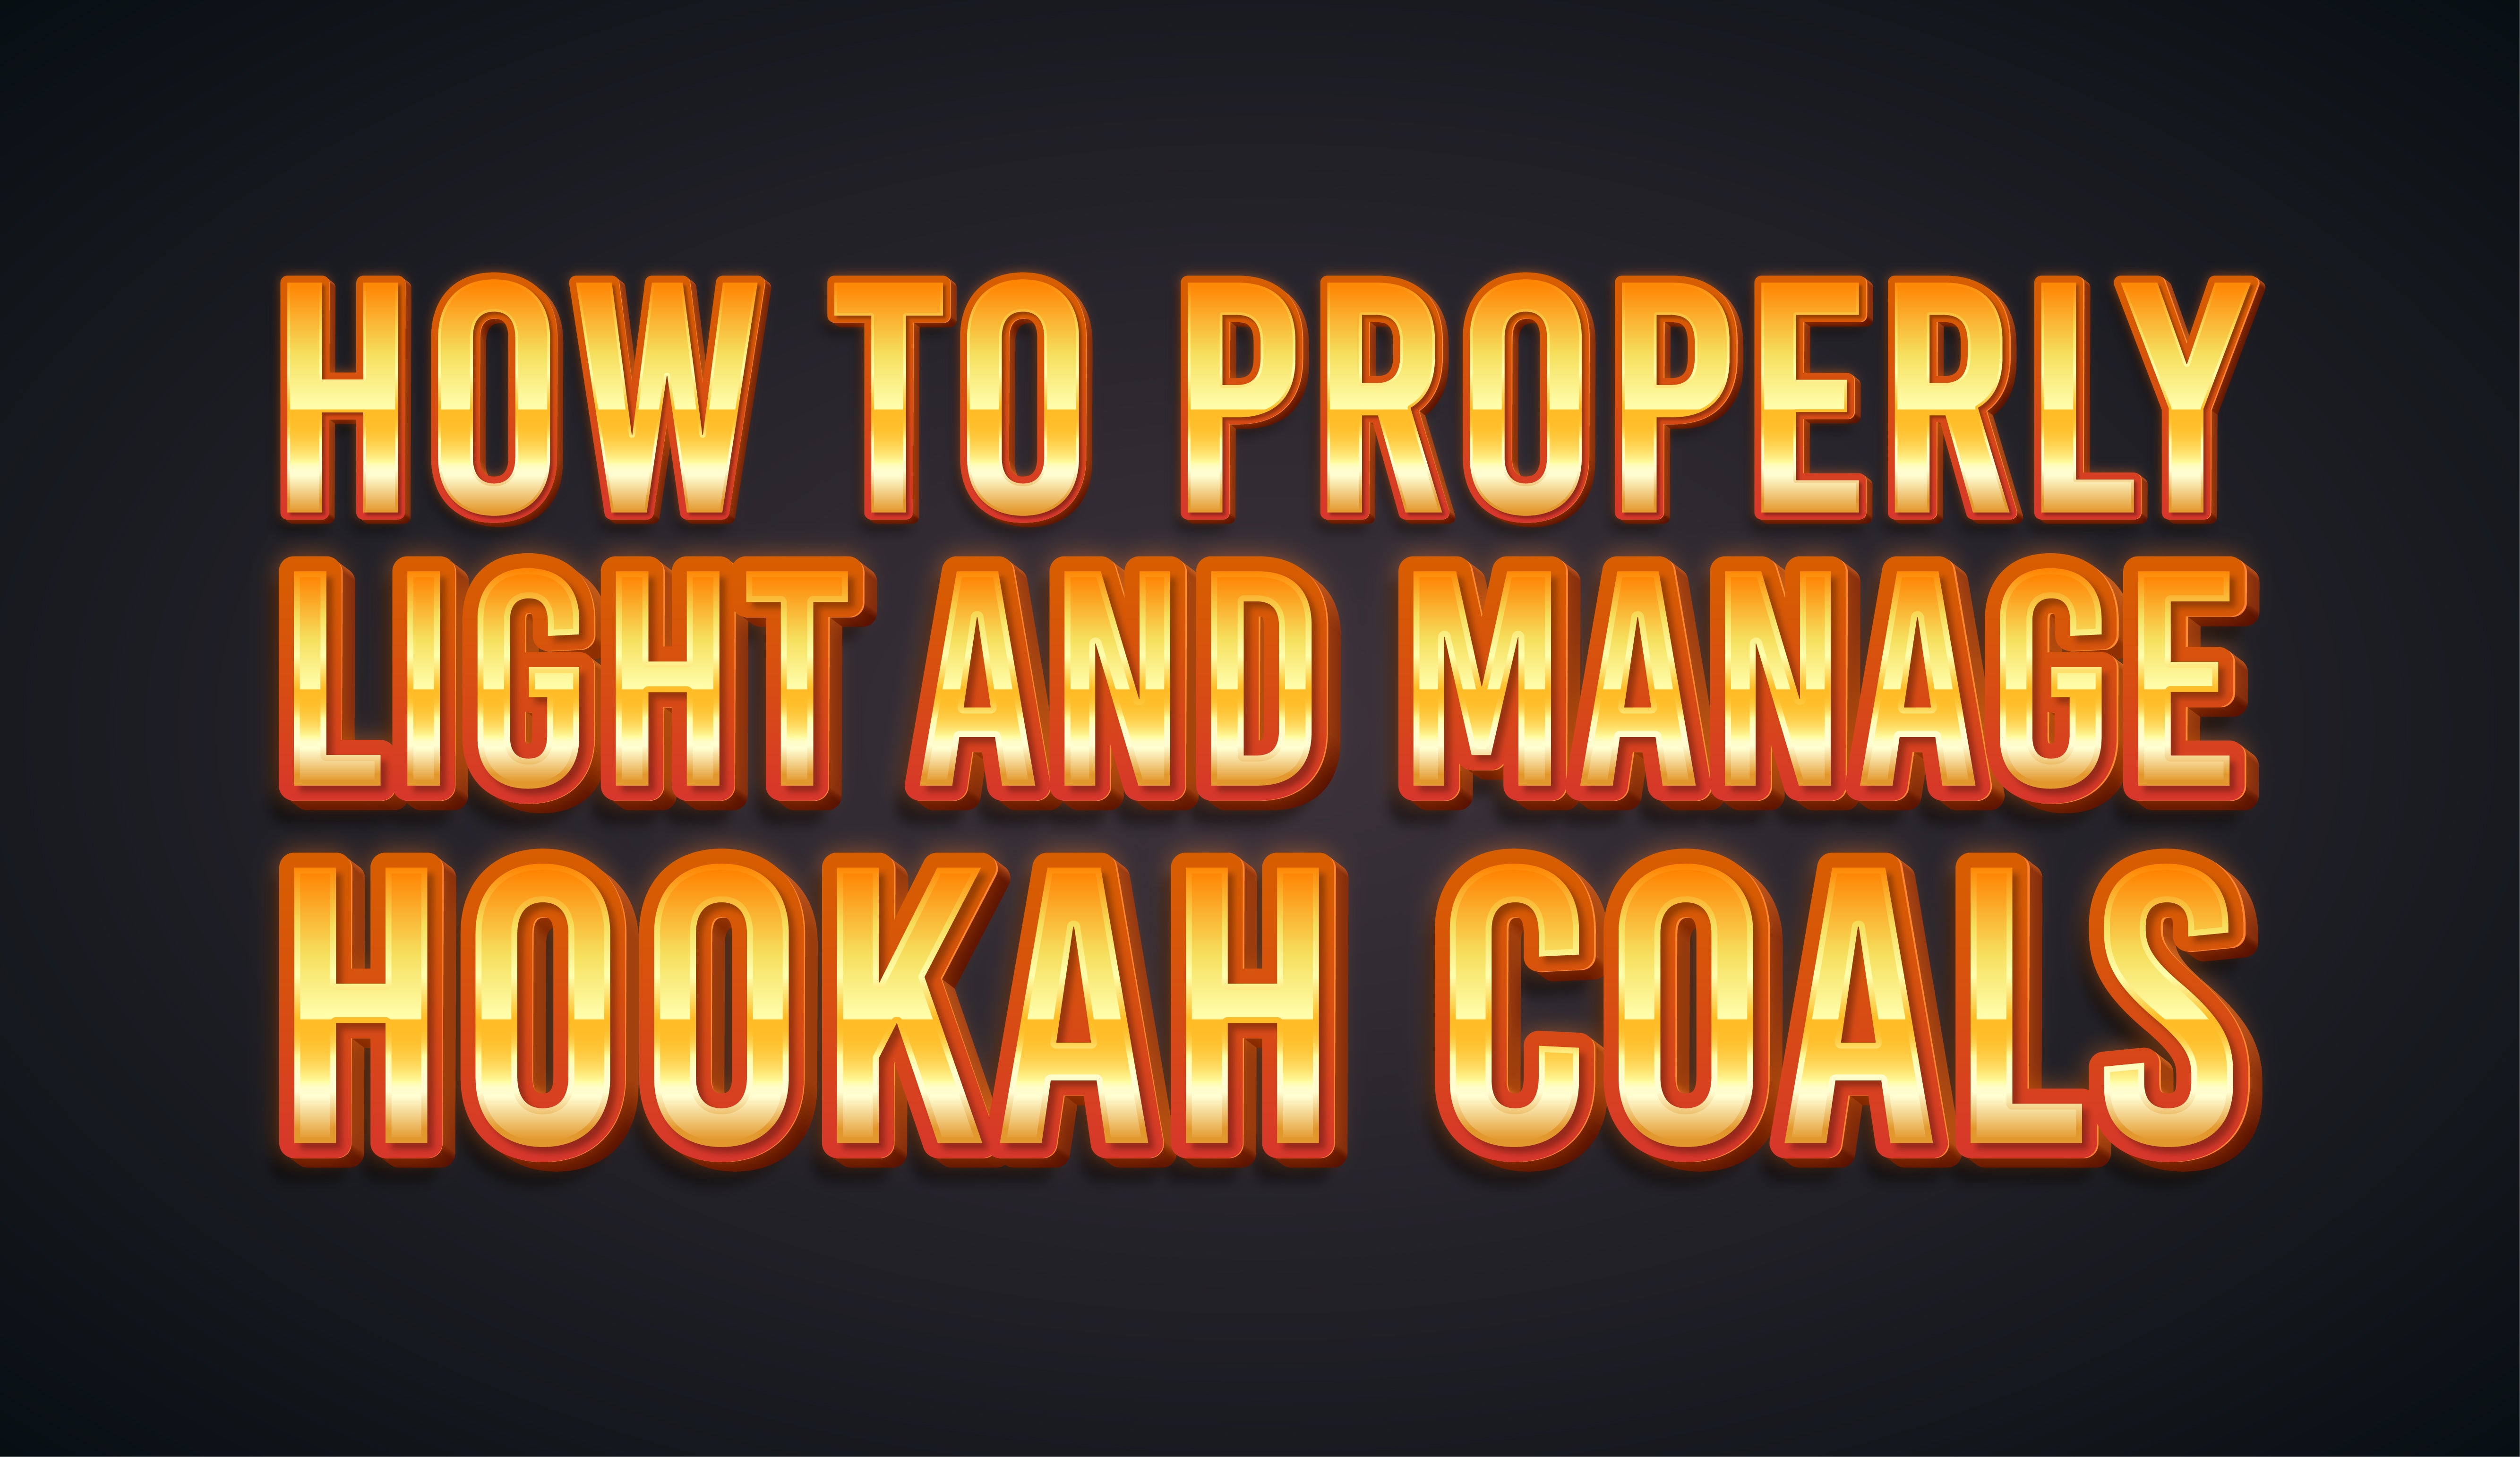 How to Properly Light and Manage Hookah Coals